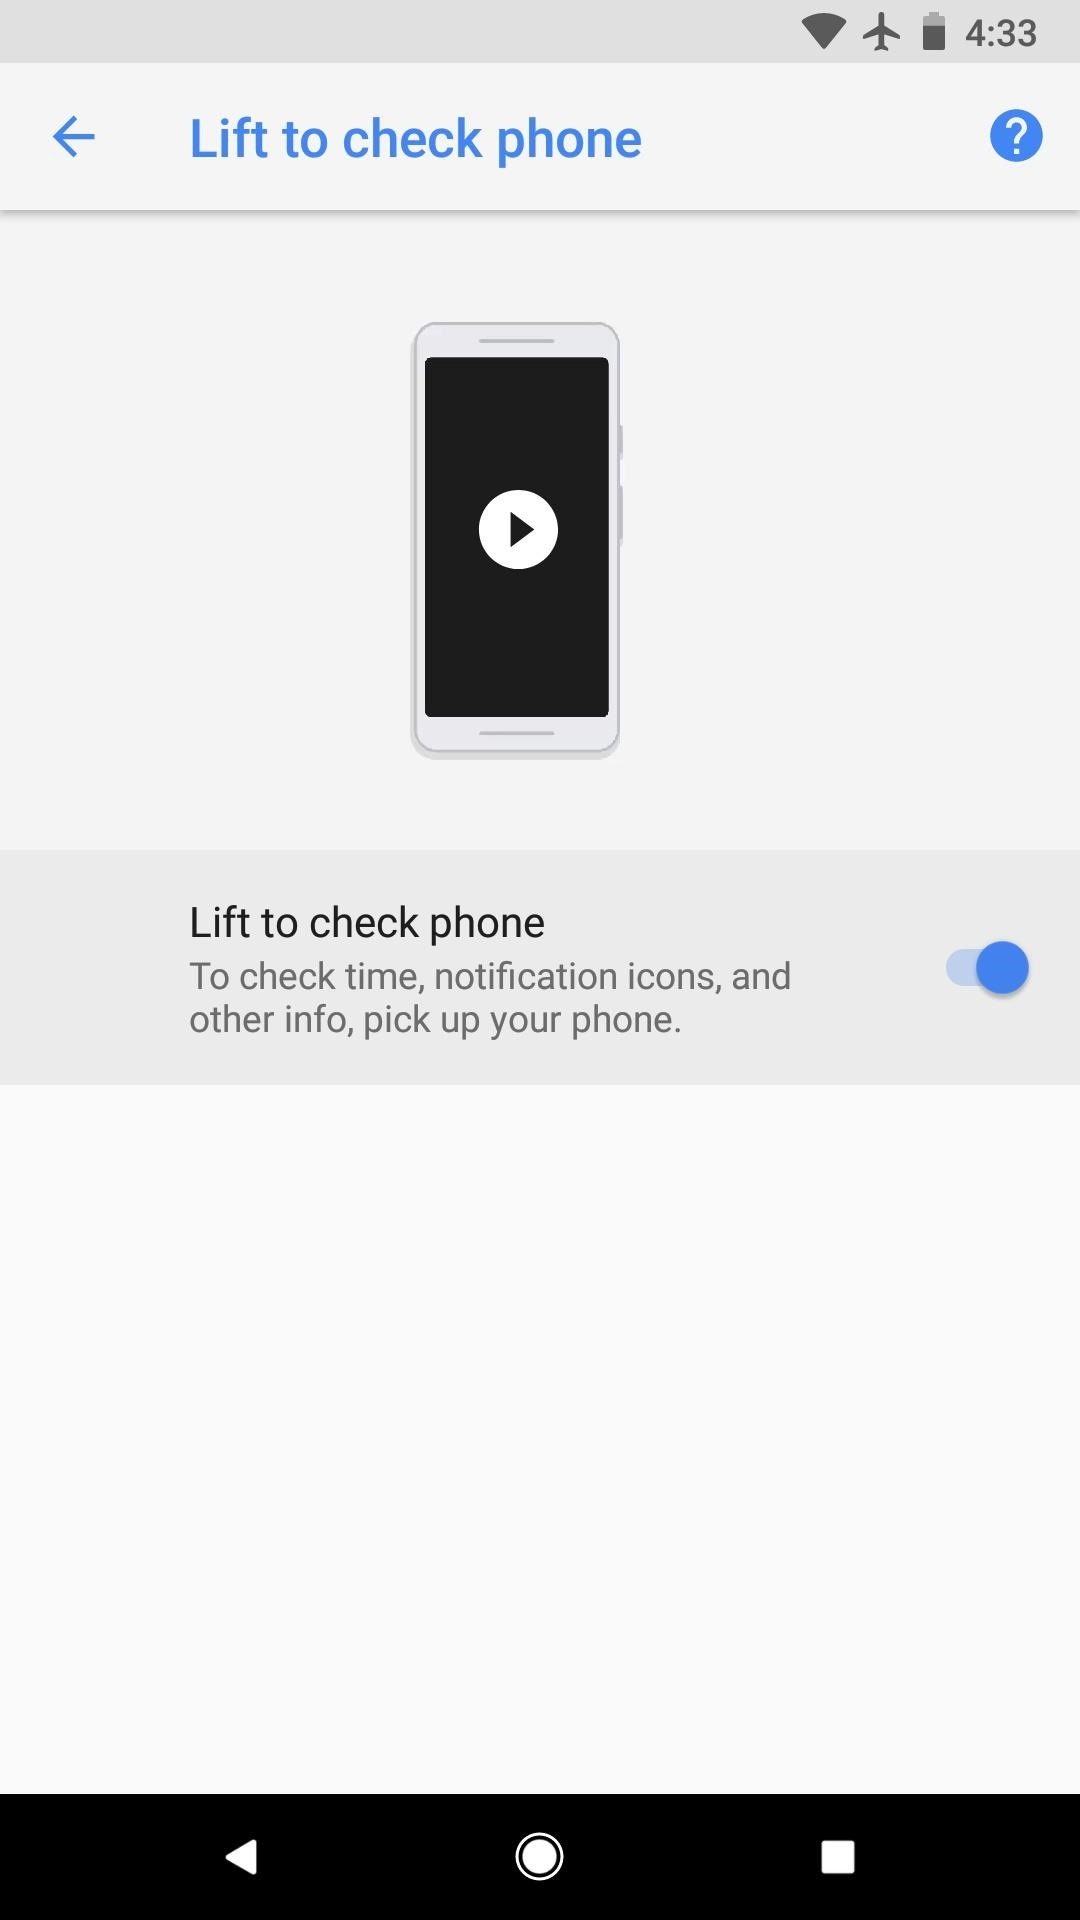 Disable the Always-on Ambient Display on Your Pixel 2 or Pixel 2 XL